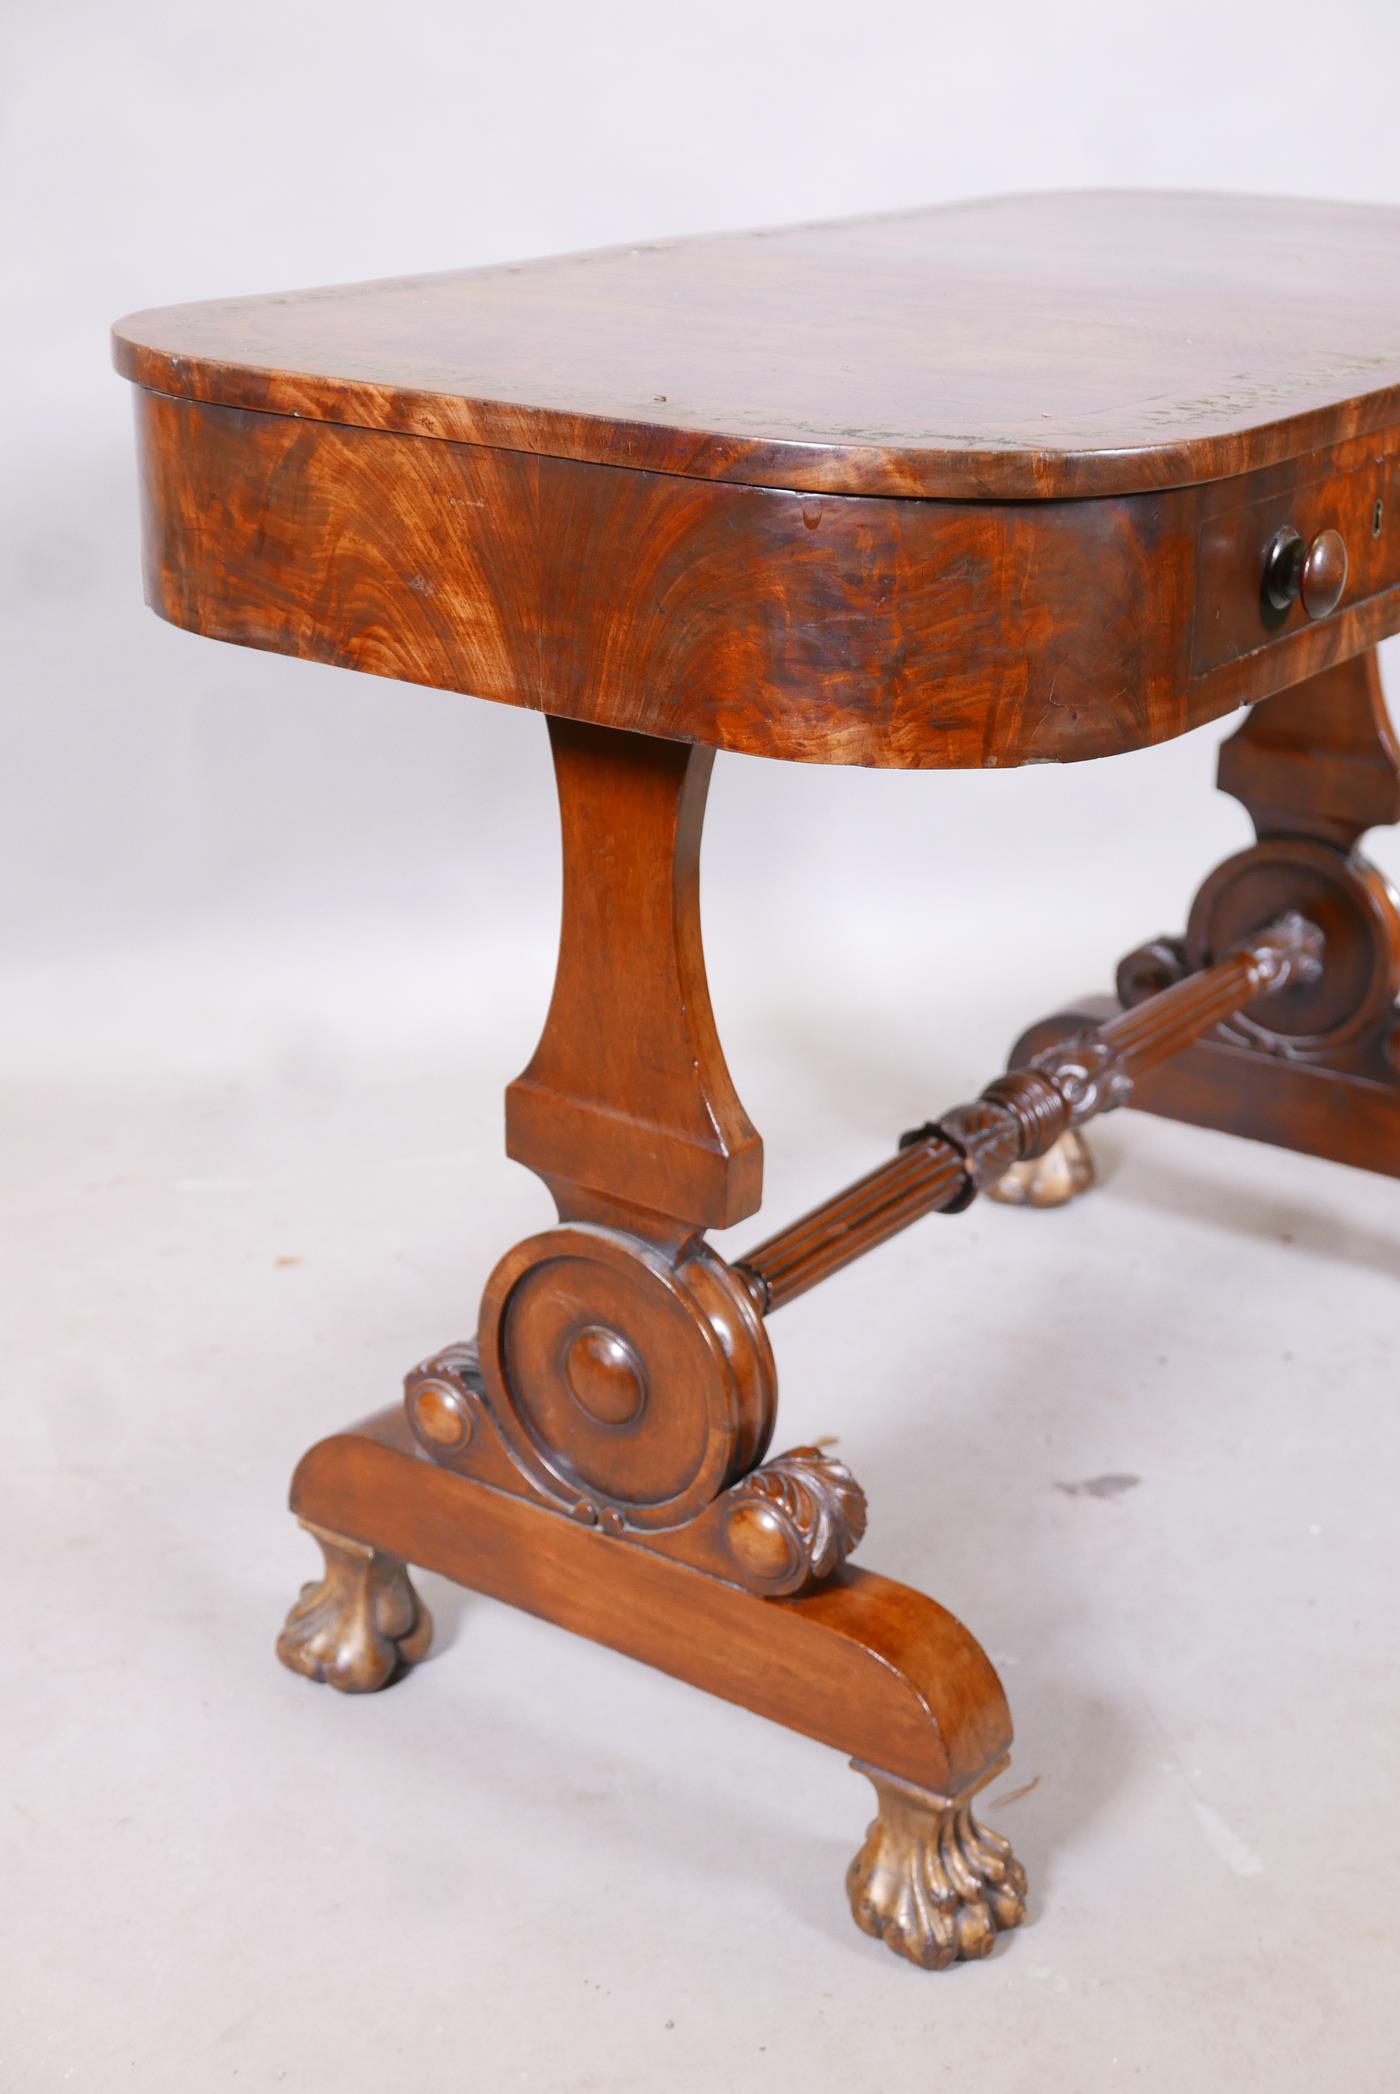 A C19th flame mahogany centre table, with two true and two false drawers, the top with rosewood - Image 5 of 6